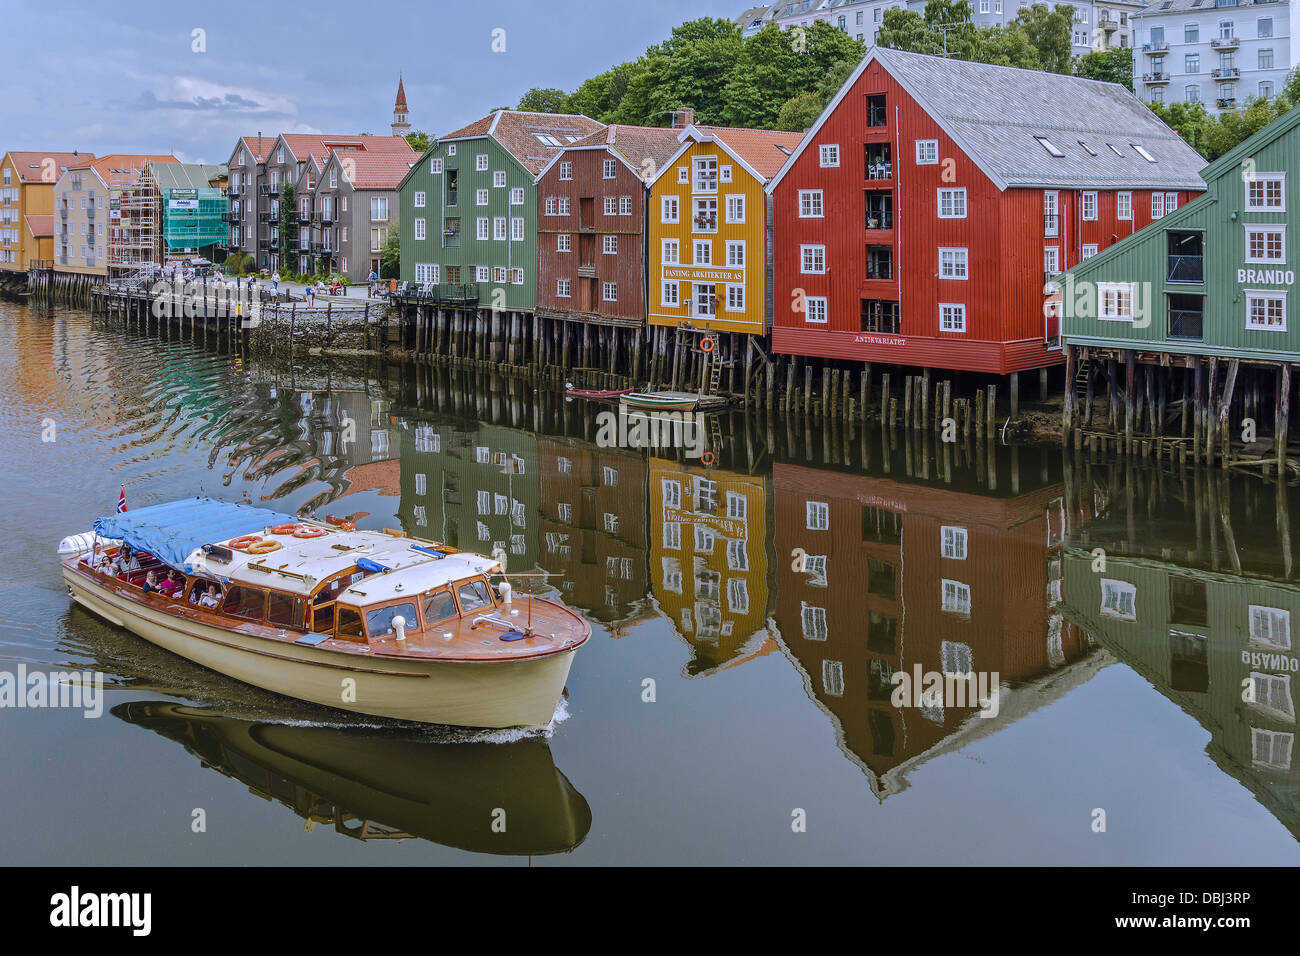 Boat On The River Nid Trondheim Norway Stock Photo